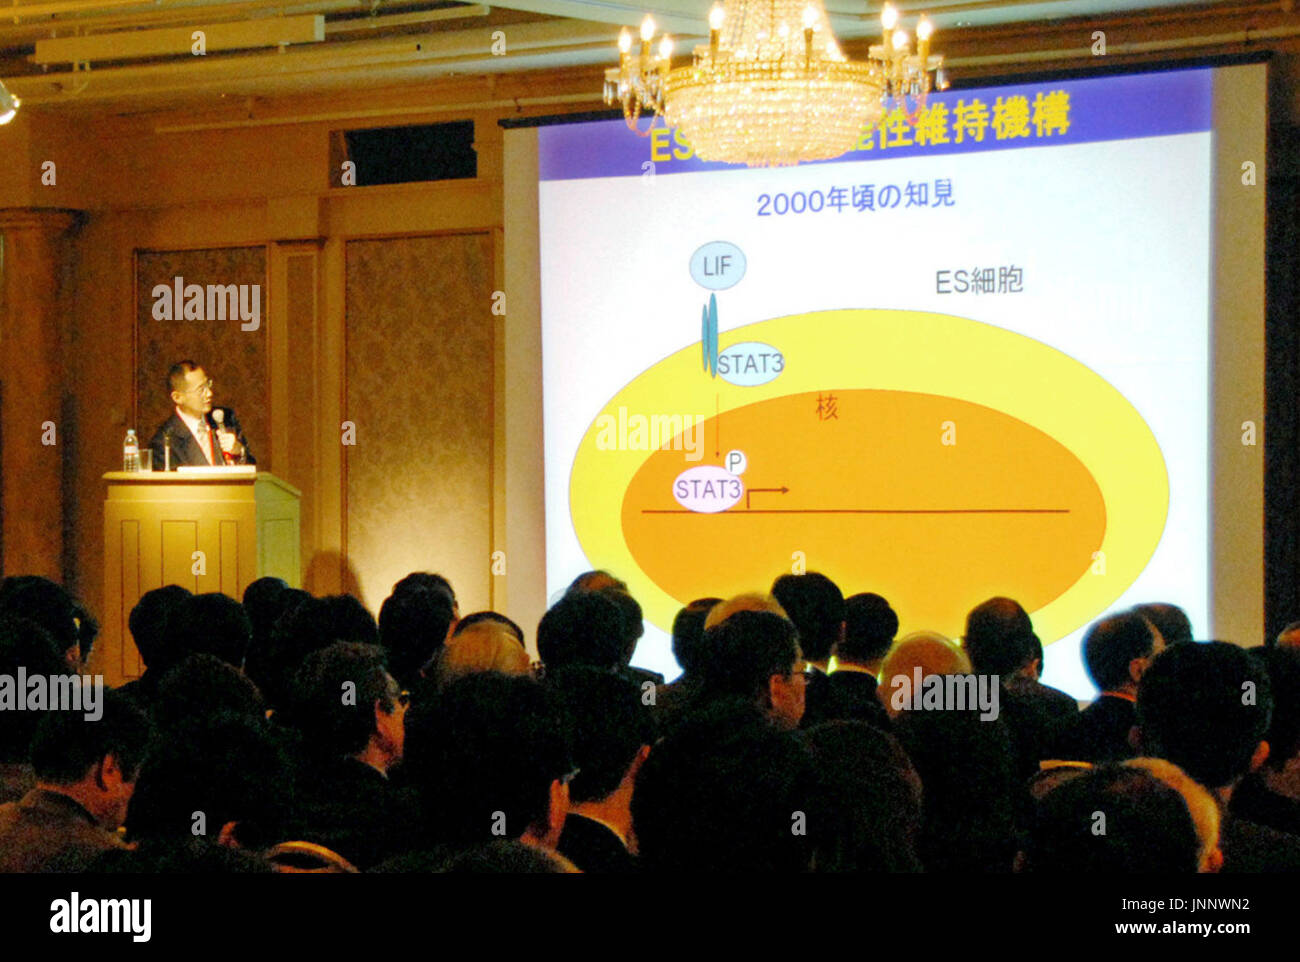 KYOTO, Japan - A symposium on induced pluripotent stem cells, or iPS cells, which have the potential to grow into various kinds of body cells, was held in Kyoto on Dec. 25, with medical experts taking part. (Kyodo) Stock Photo